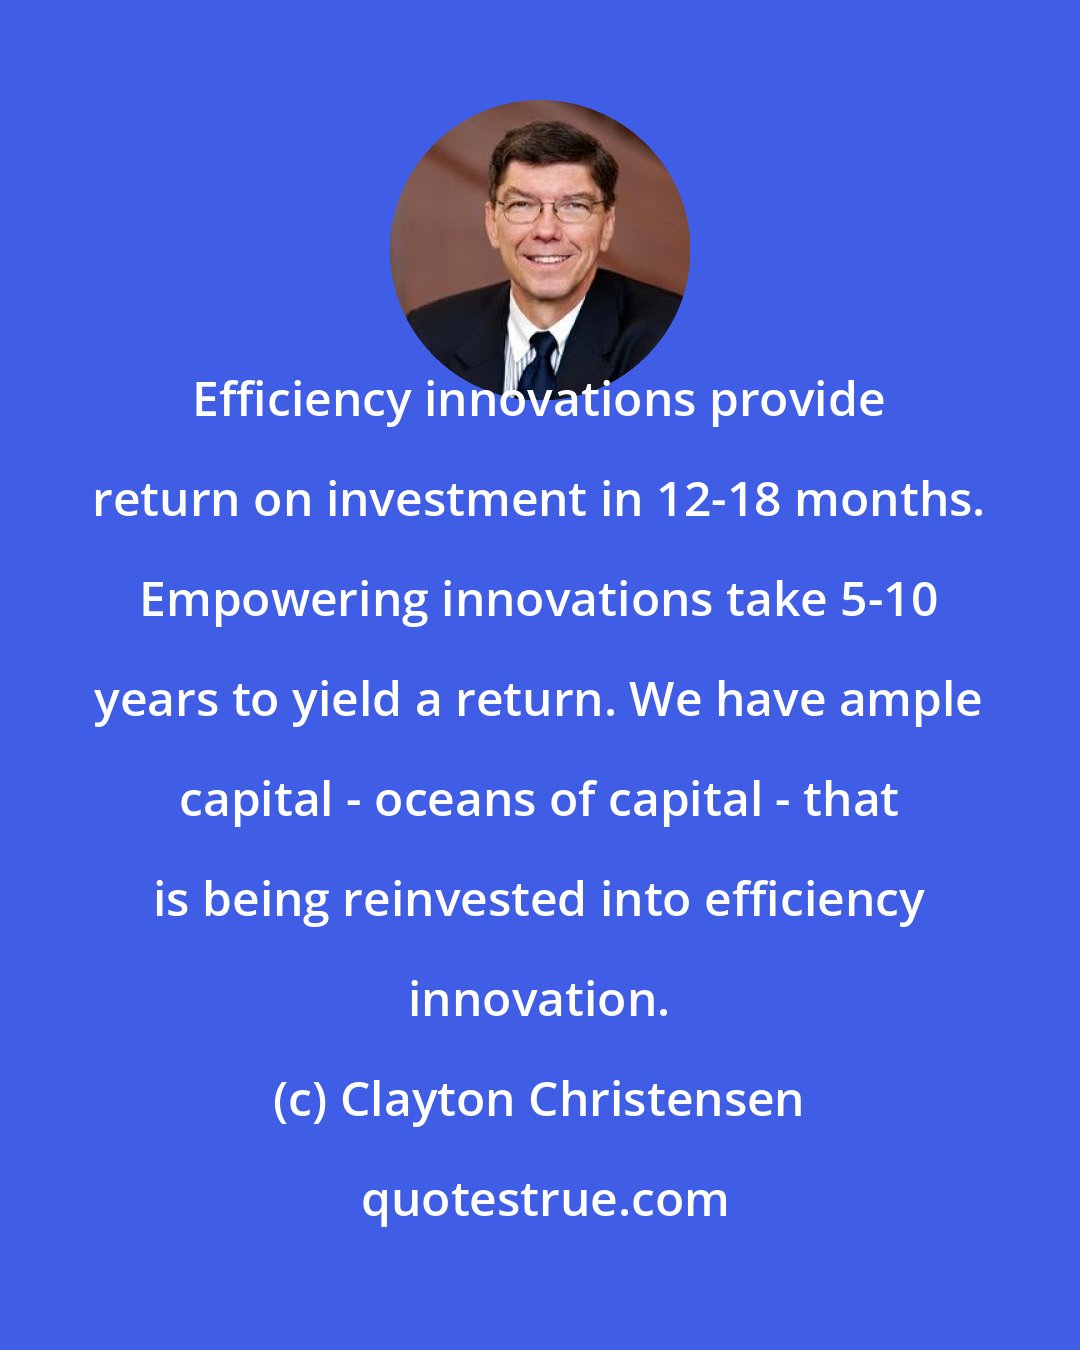 Clayton Christensen: Efficiency innovations provide return on investment in 12-18 months. Empowering innovations take 5-10 years to yield a return. We have ample capital - oceans of capital - that is being reinvested into efficiency innovation.